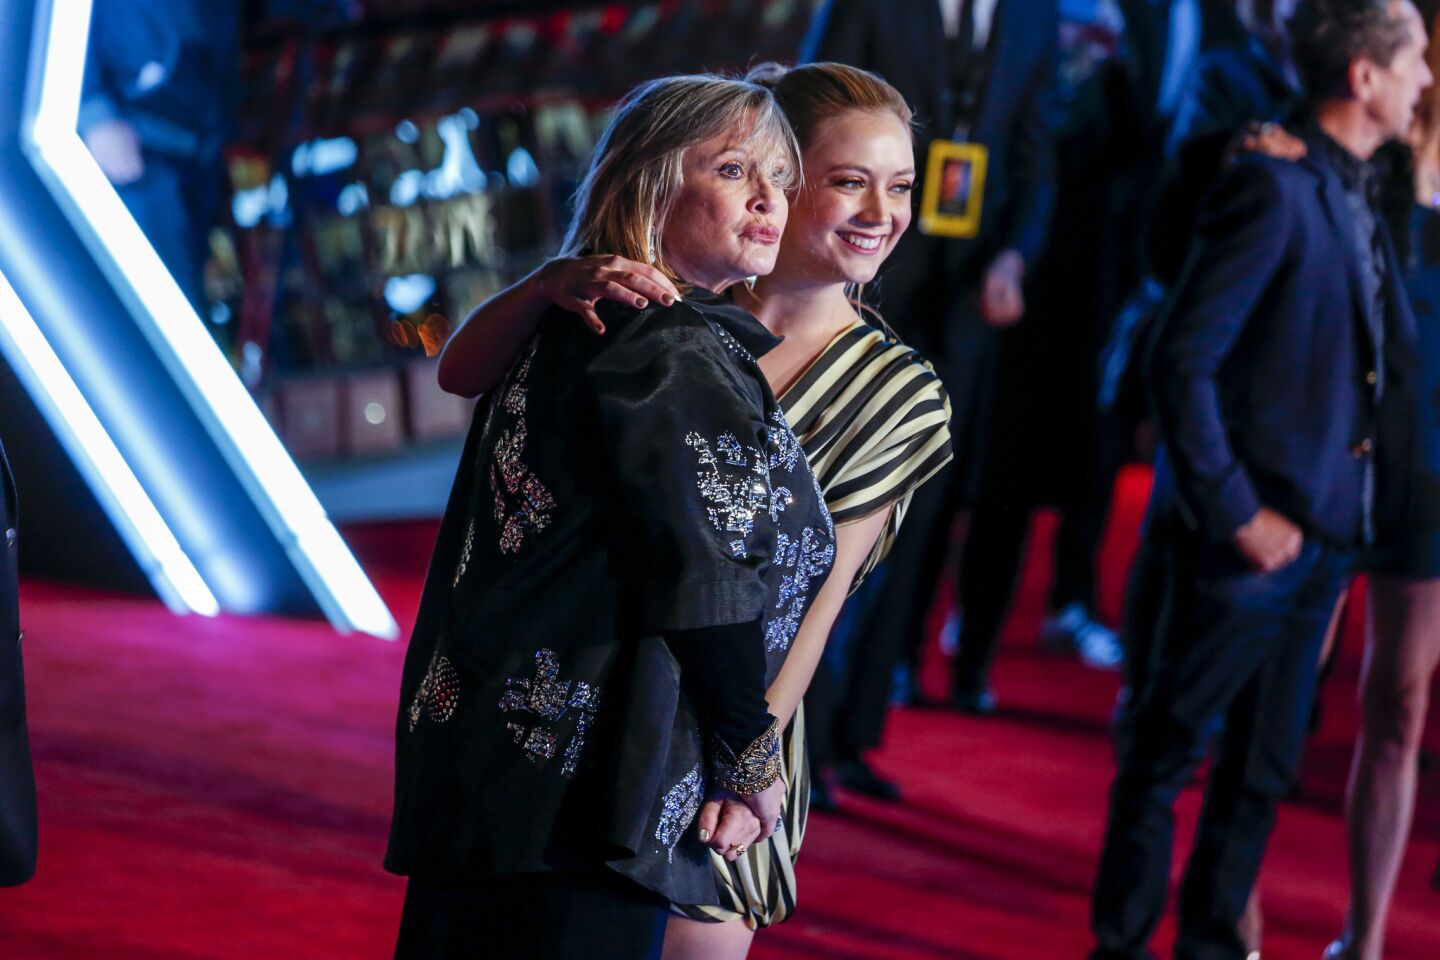 Carrie Fisher with her daughter, Billie Lourd, on the red carpet at the premiere of "Star Wars: The Force Awakens" in Hollywood on Dec. 14, 2015.